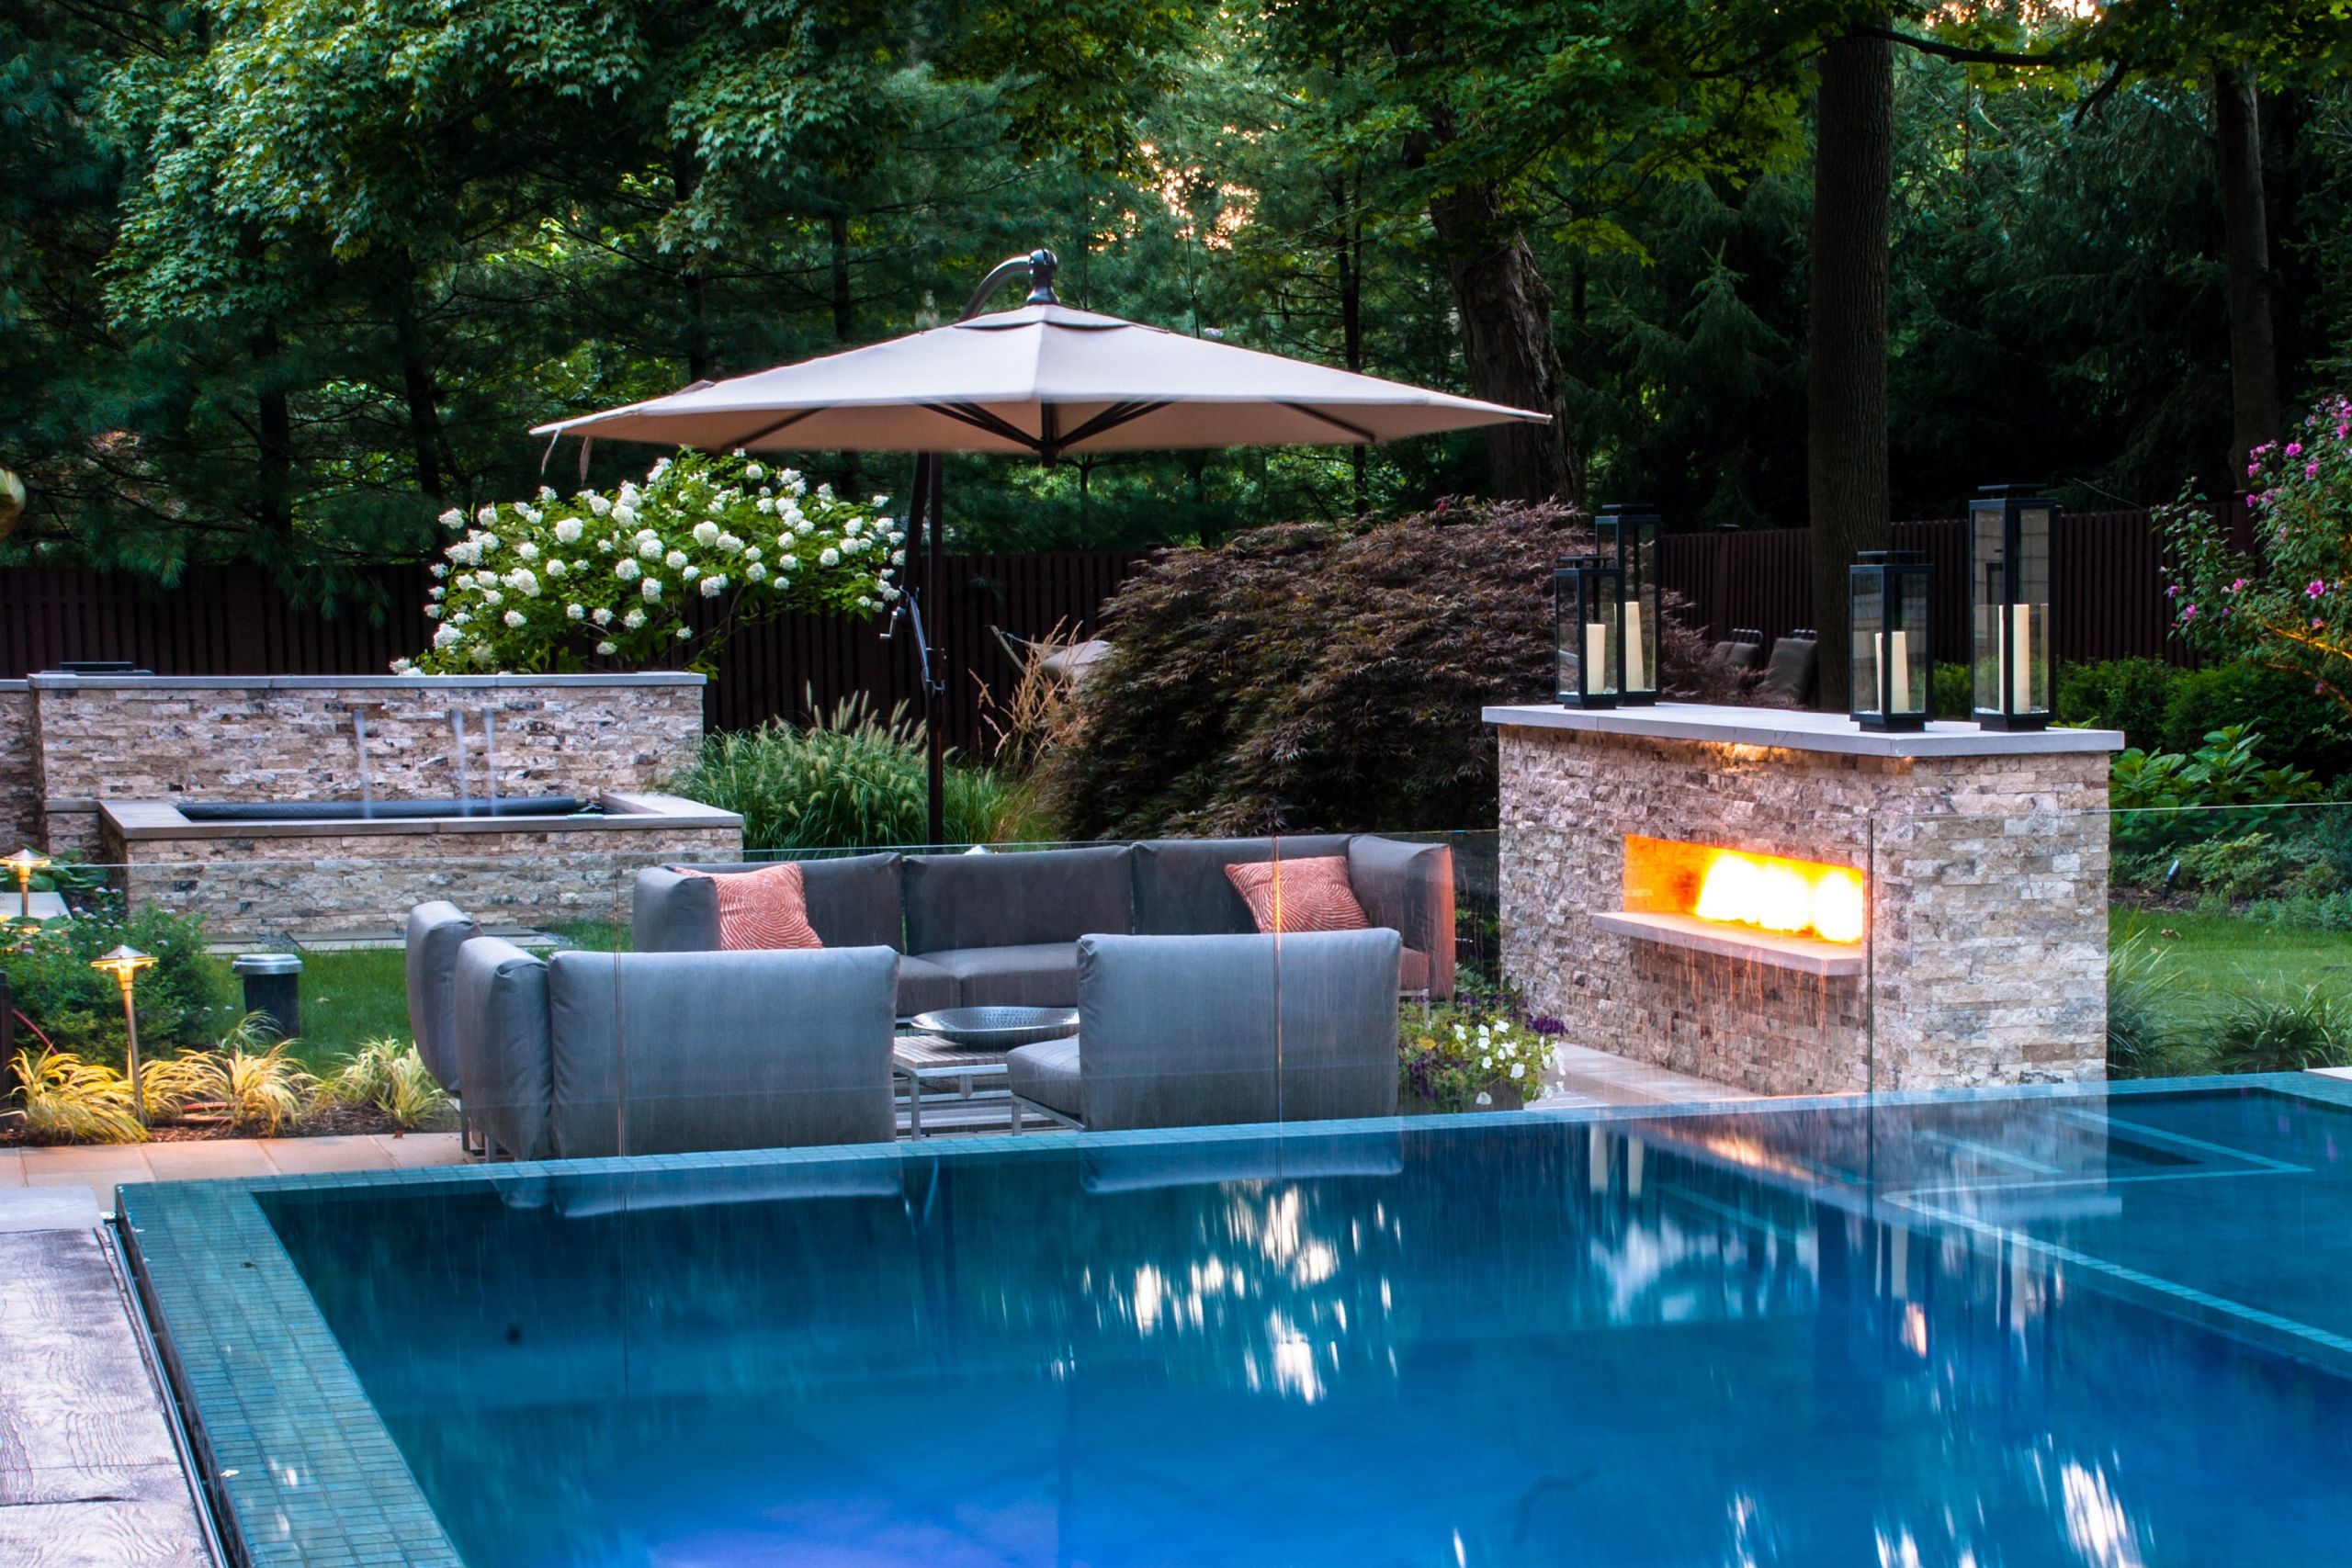 Pool Landscapes Designs
 Bergen County NJ Pool & Landscaping Ideas Wins pany Awards